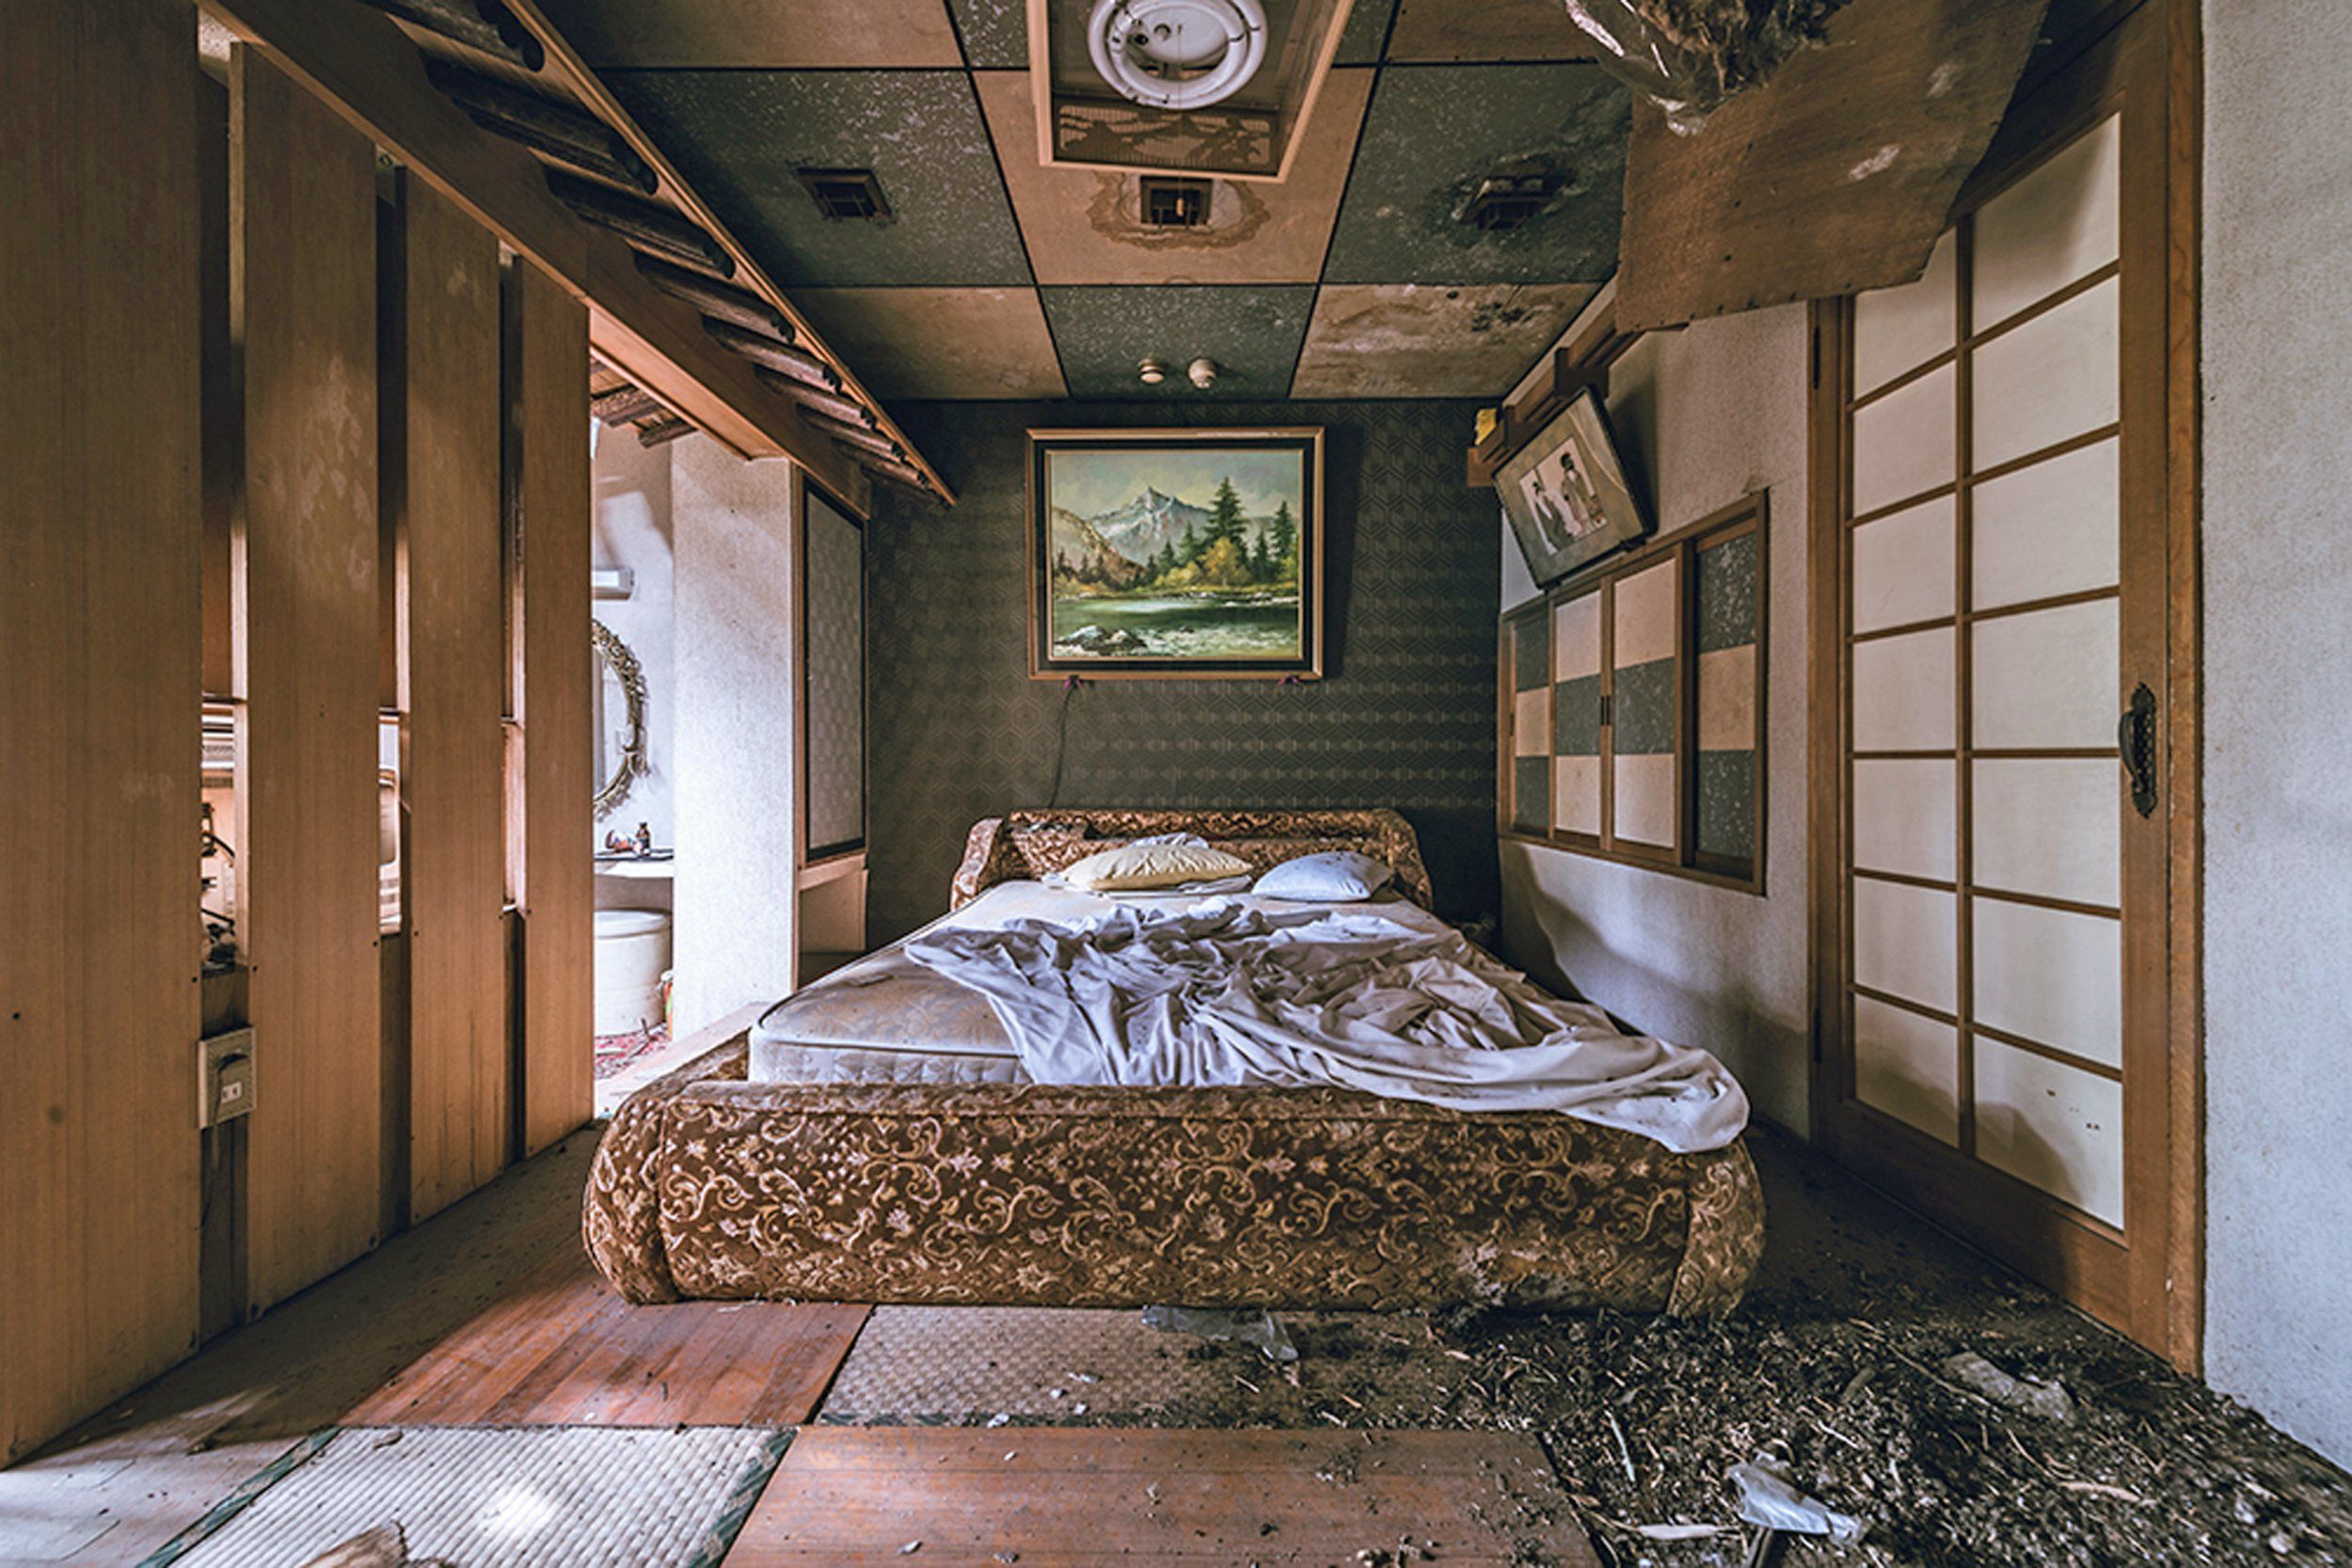 Pictured, a rotting embroidered bed sits in an alpine-themed room